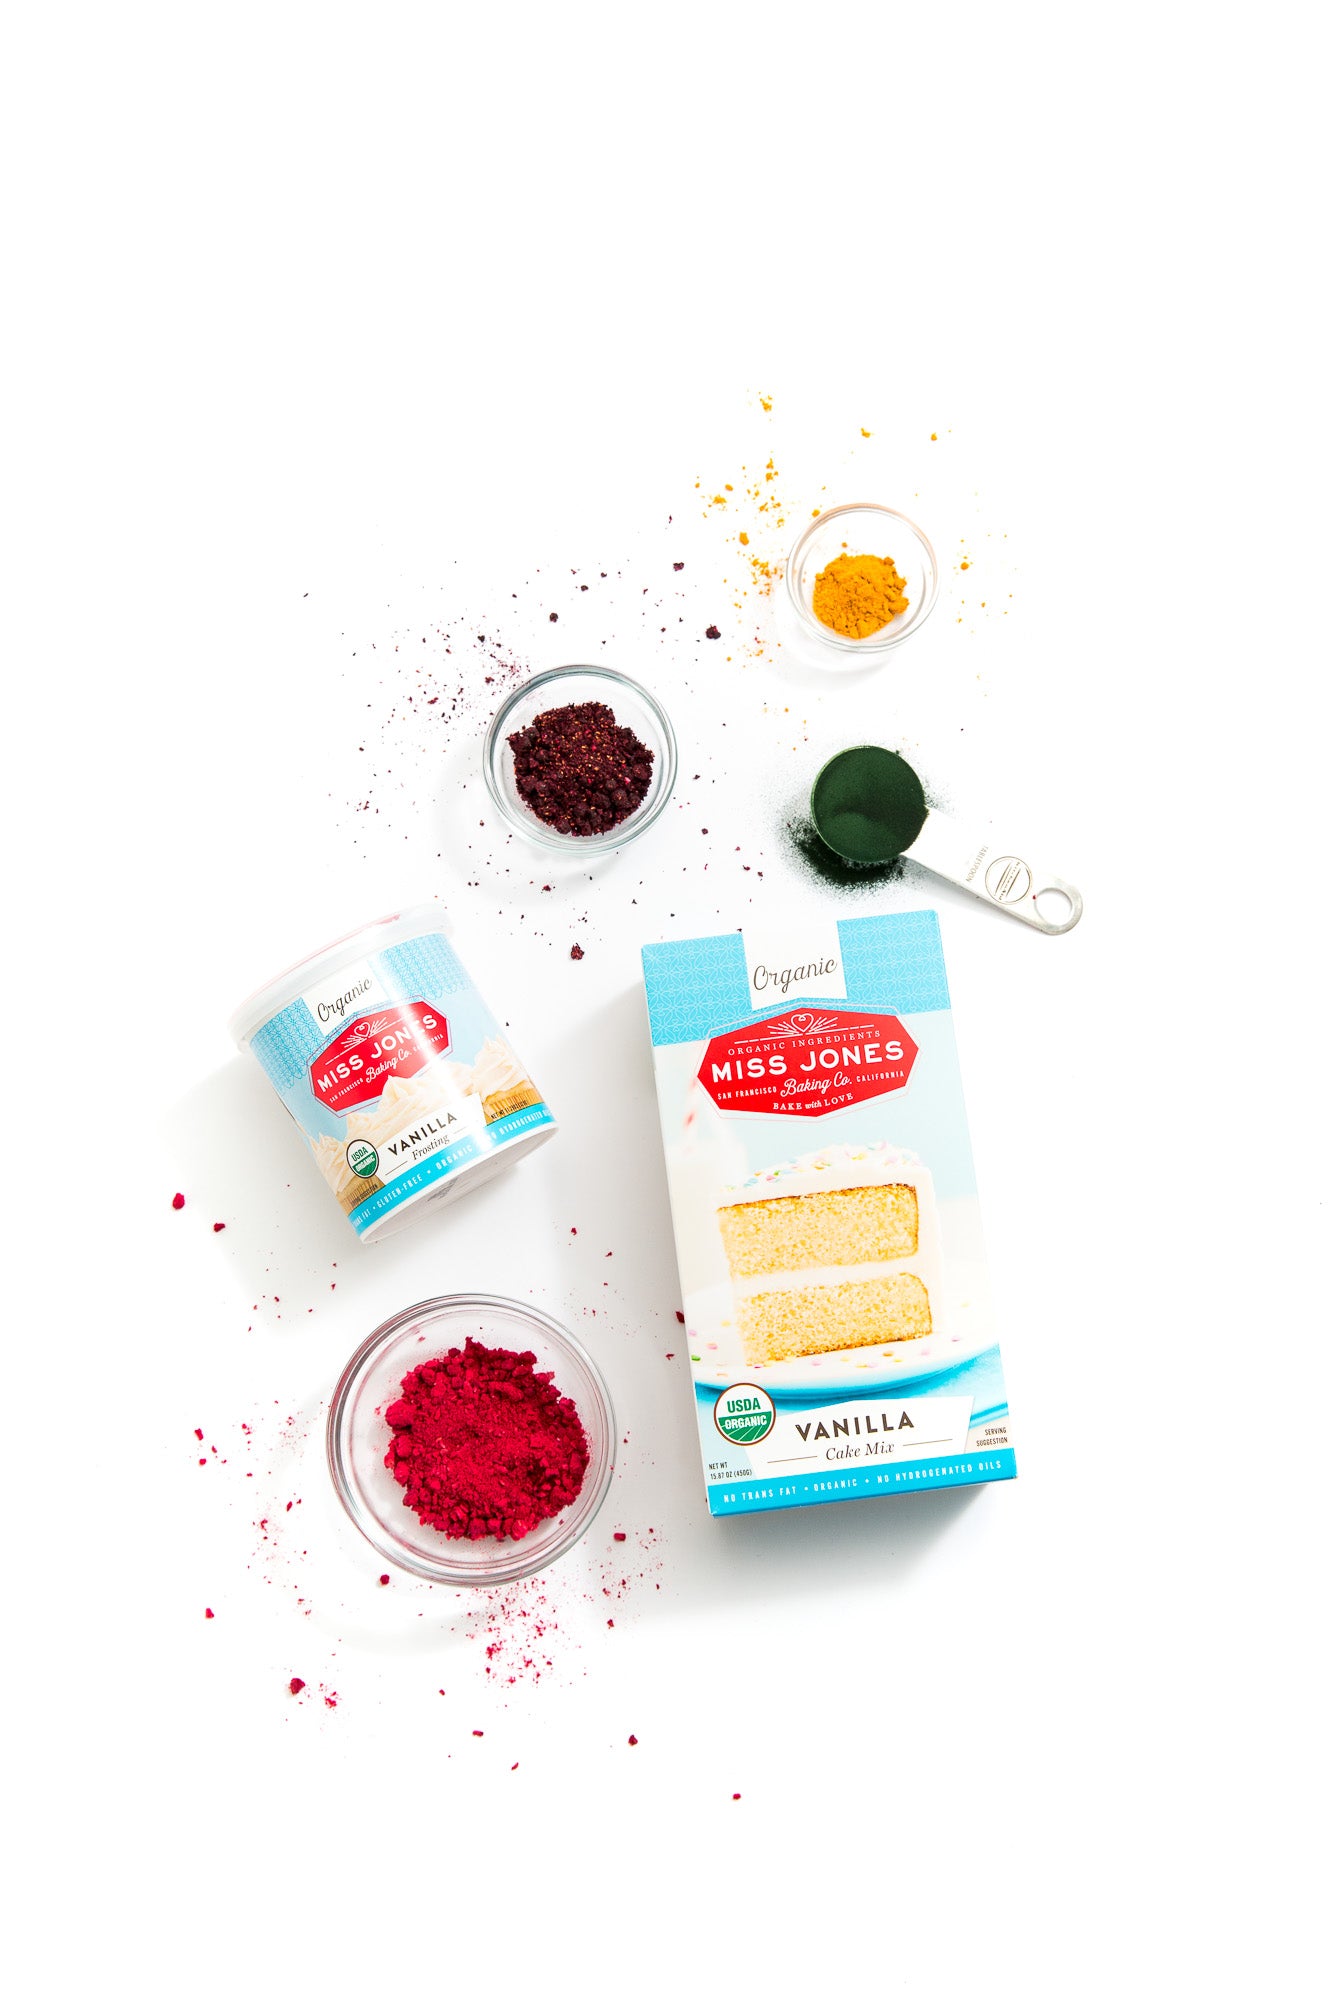 Image from above of a box of Miss Jones Vanilla Cake Mix, a jar of Miss Jones Vanilla Frosting and red, purple, green, and yellow food dyes